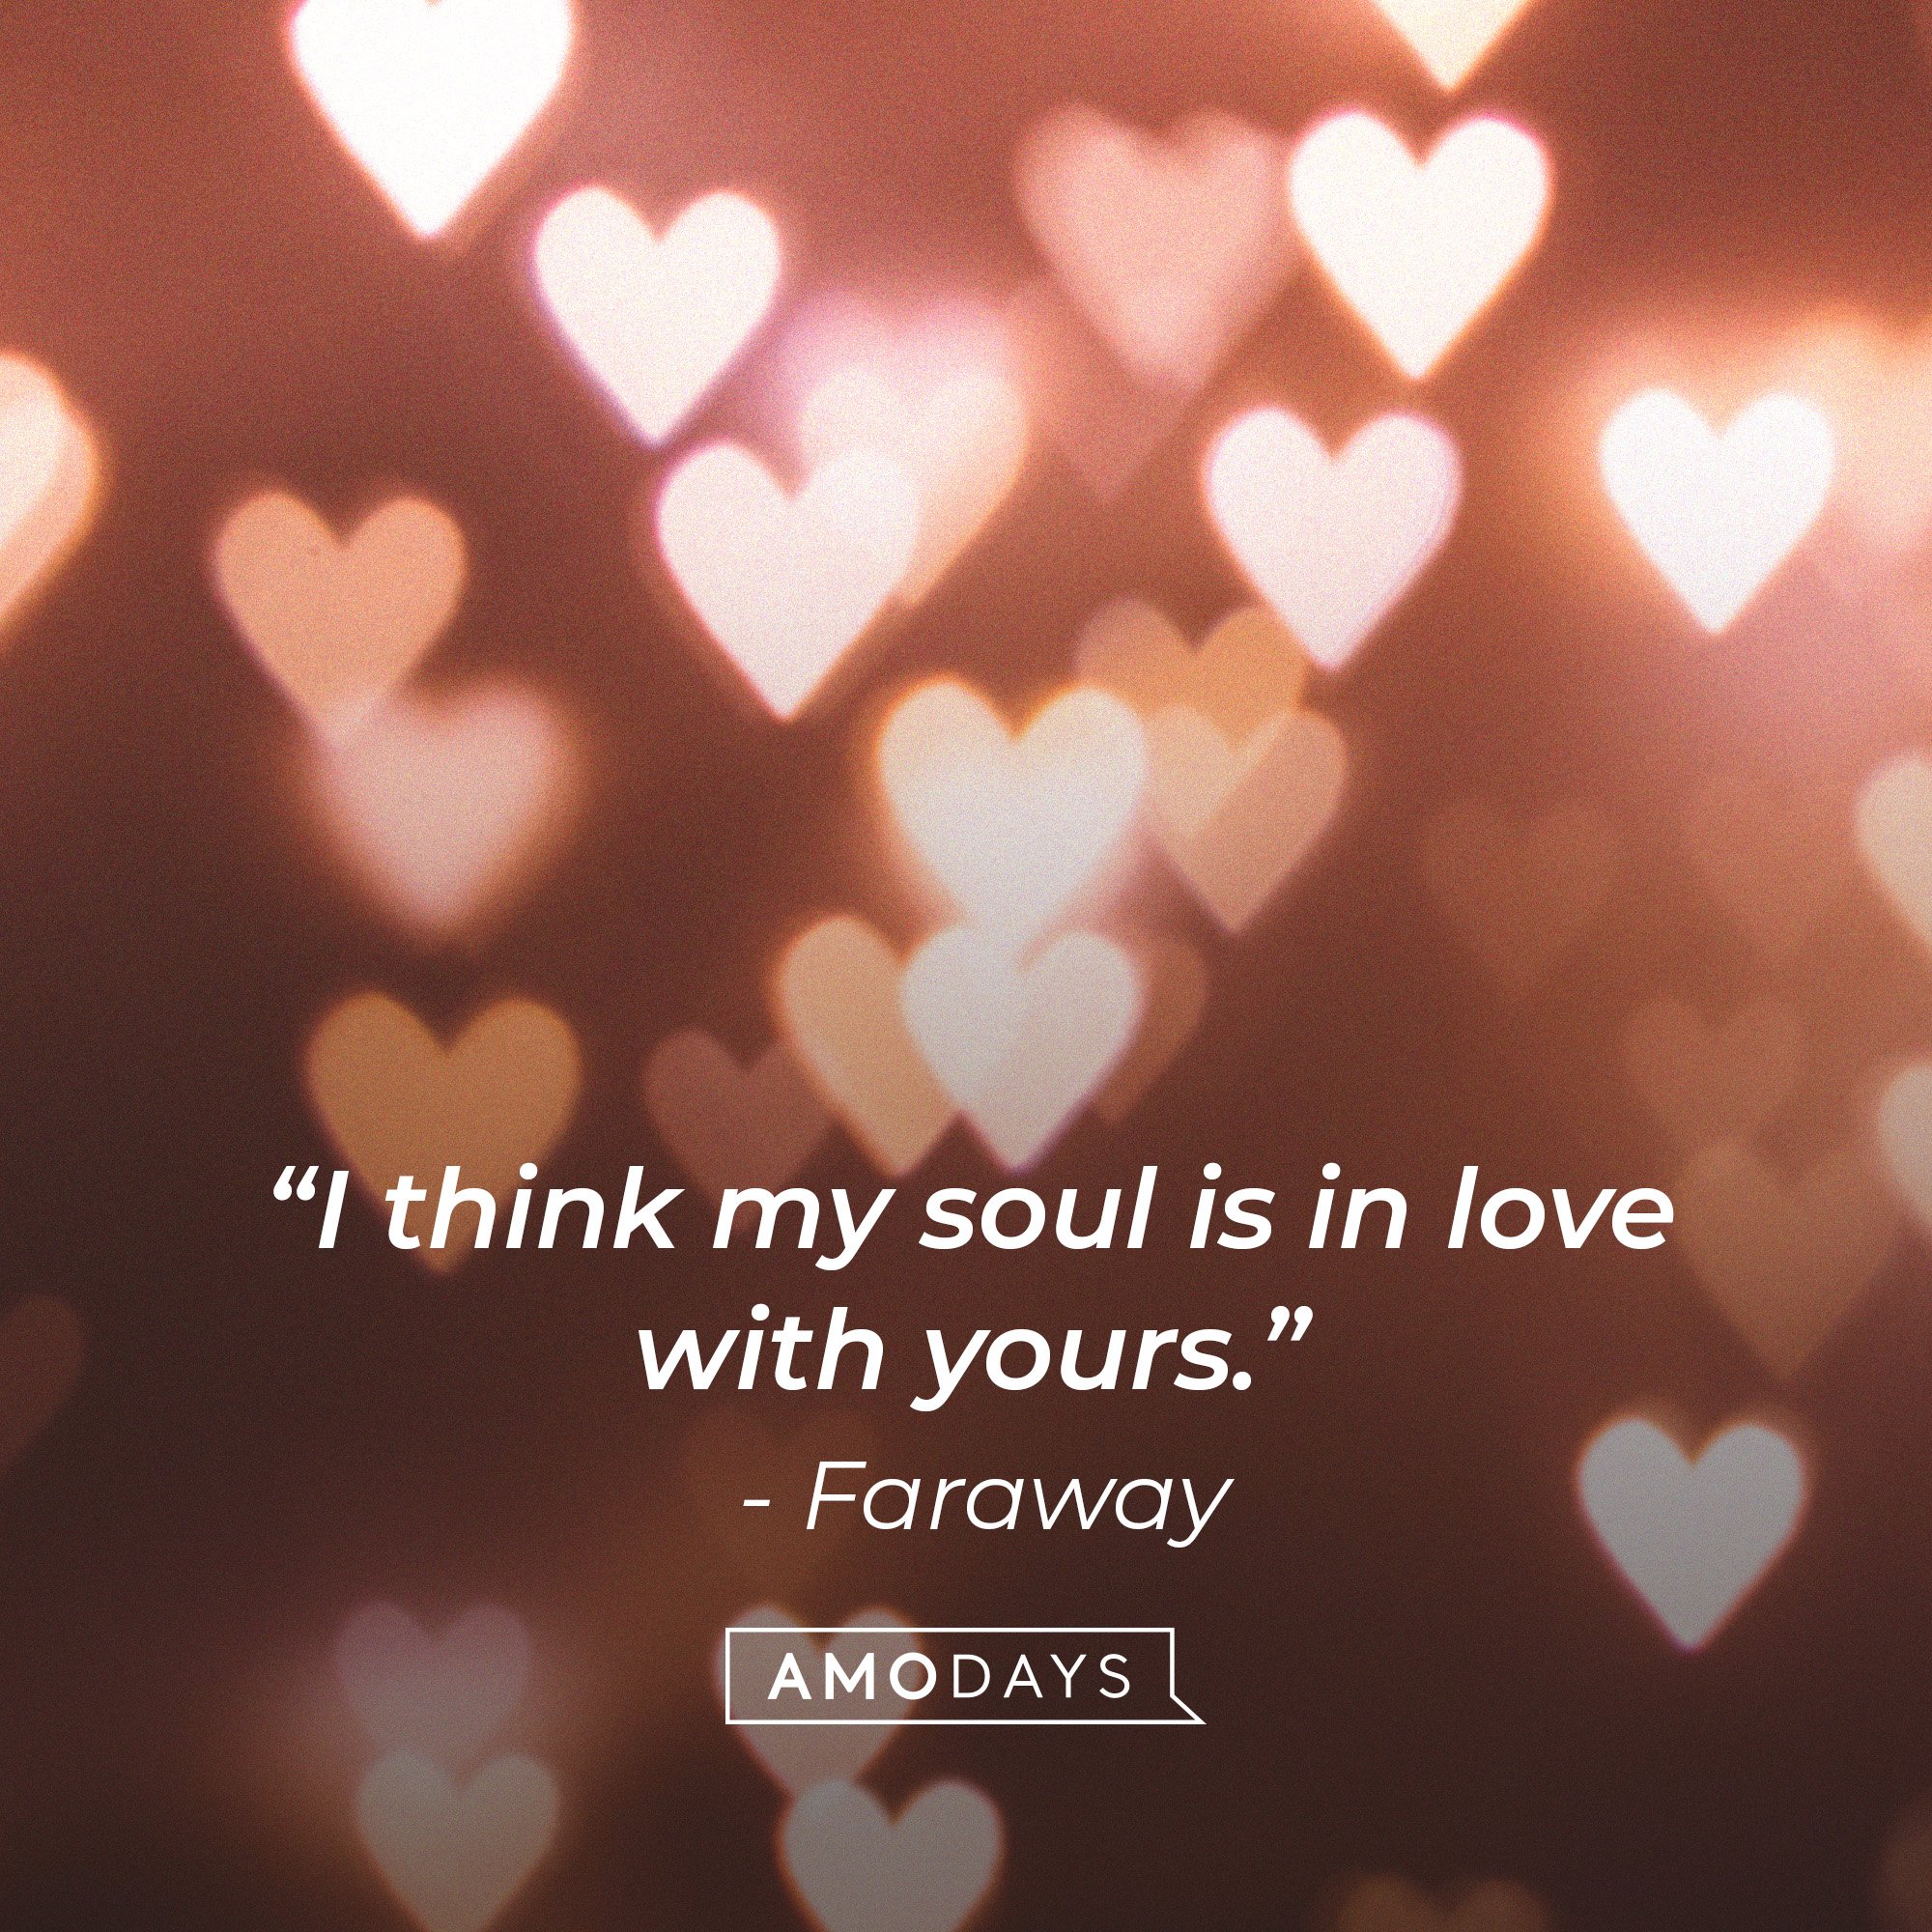 Faraway's quote: “I think my soul is in love with yours.” | Image: AmoDays